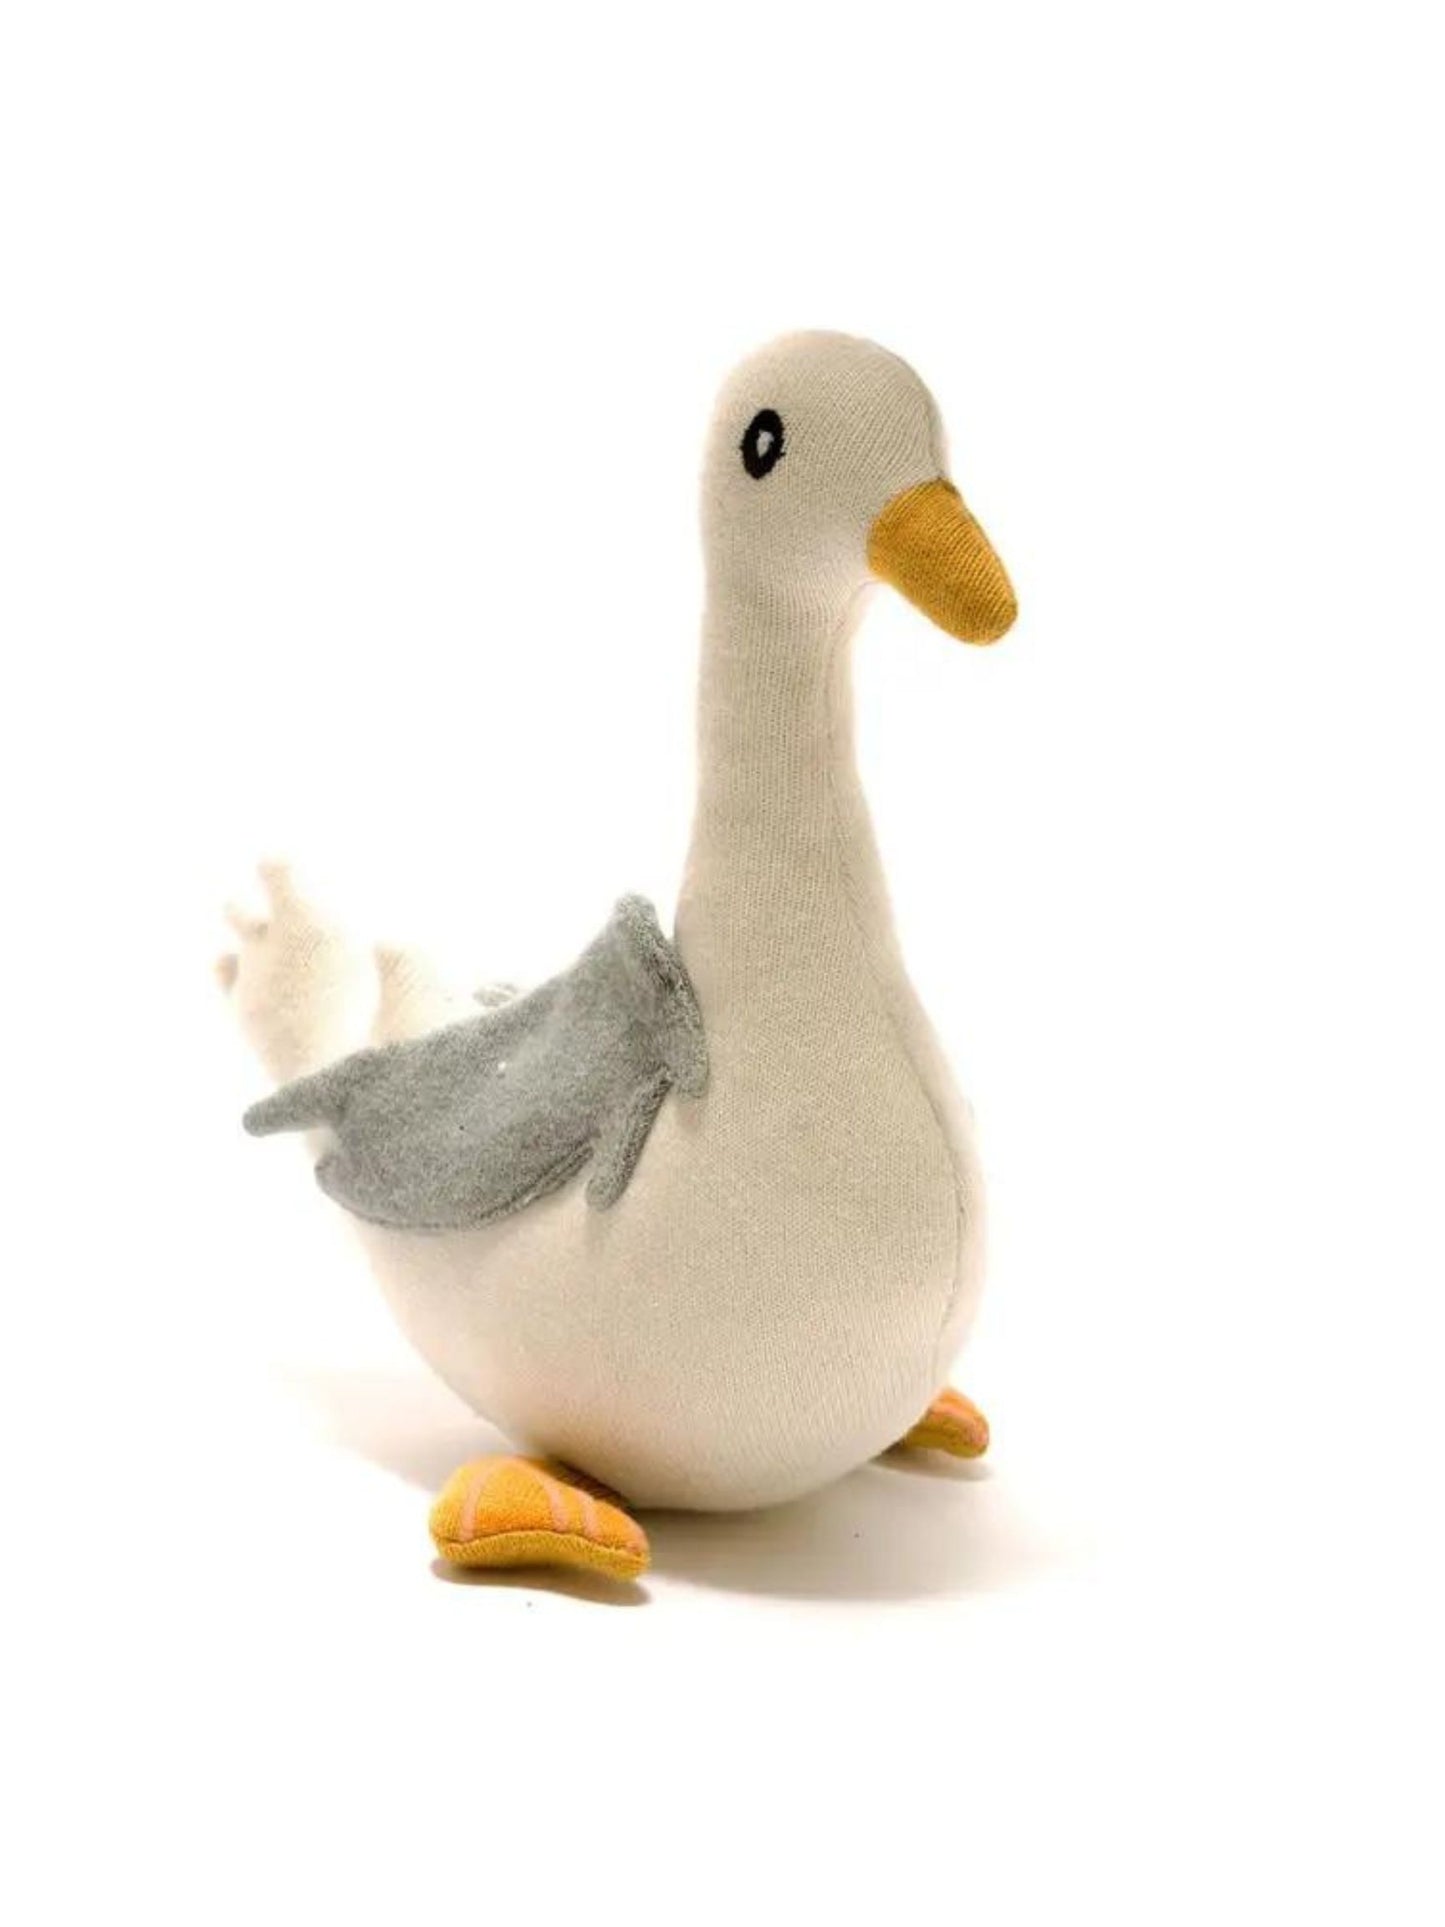 Knitted Organic Cotton Seagull Plush Toy